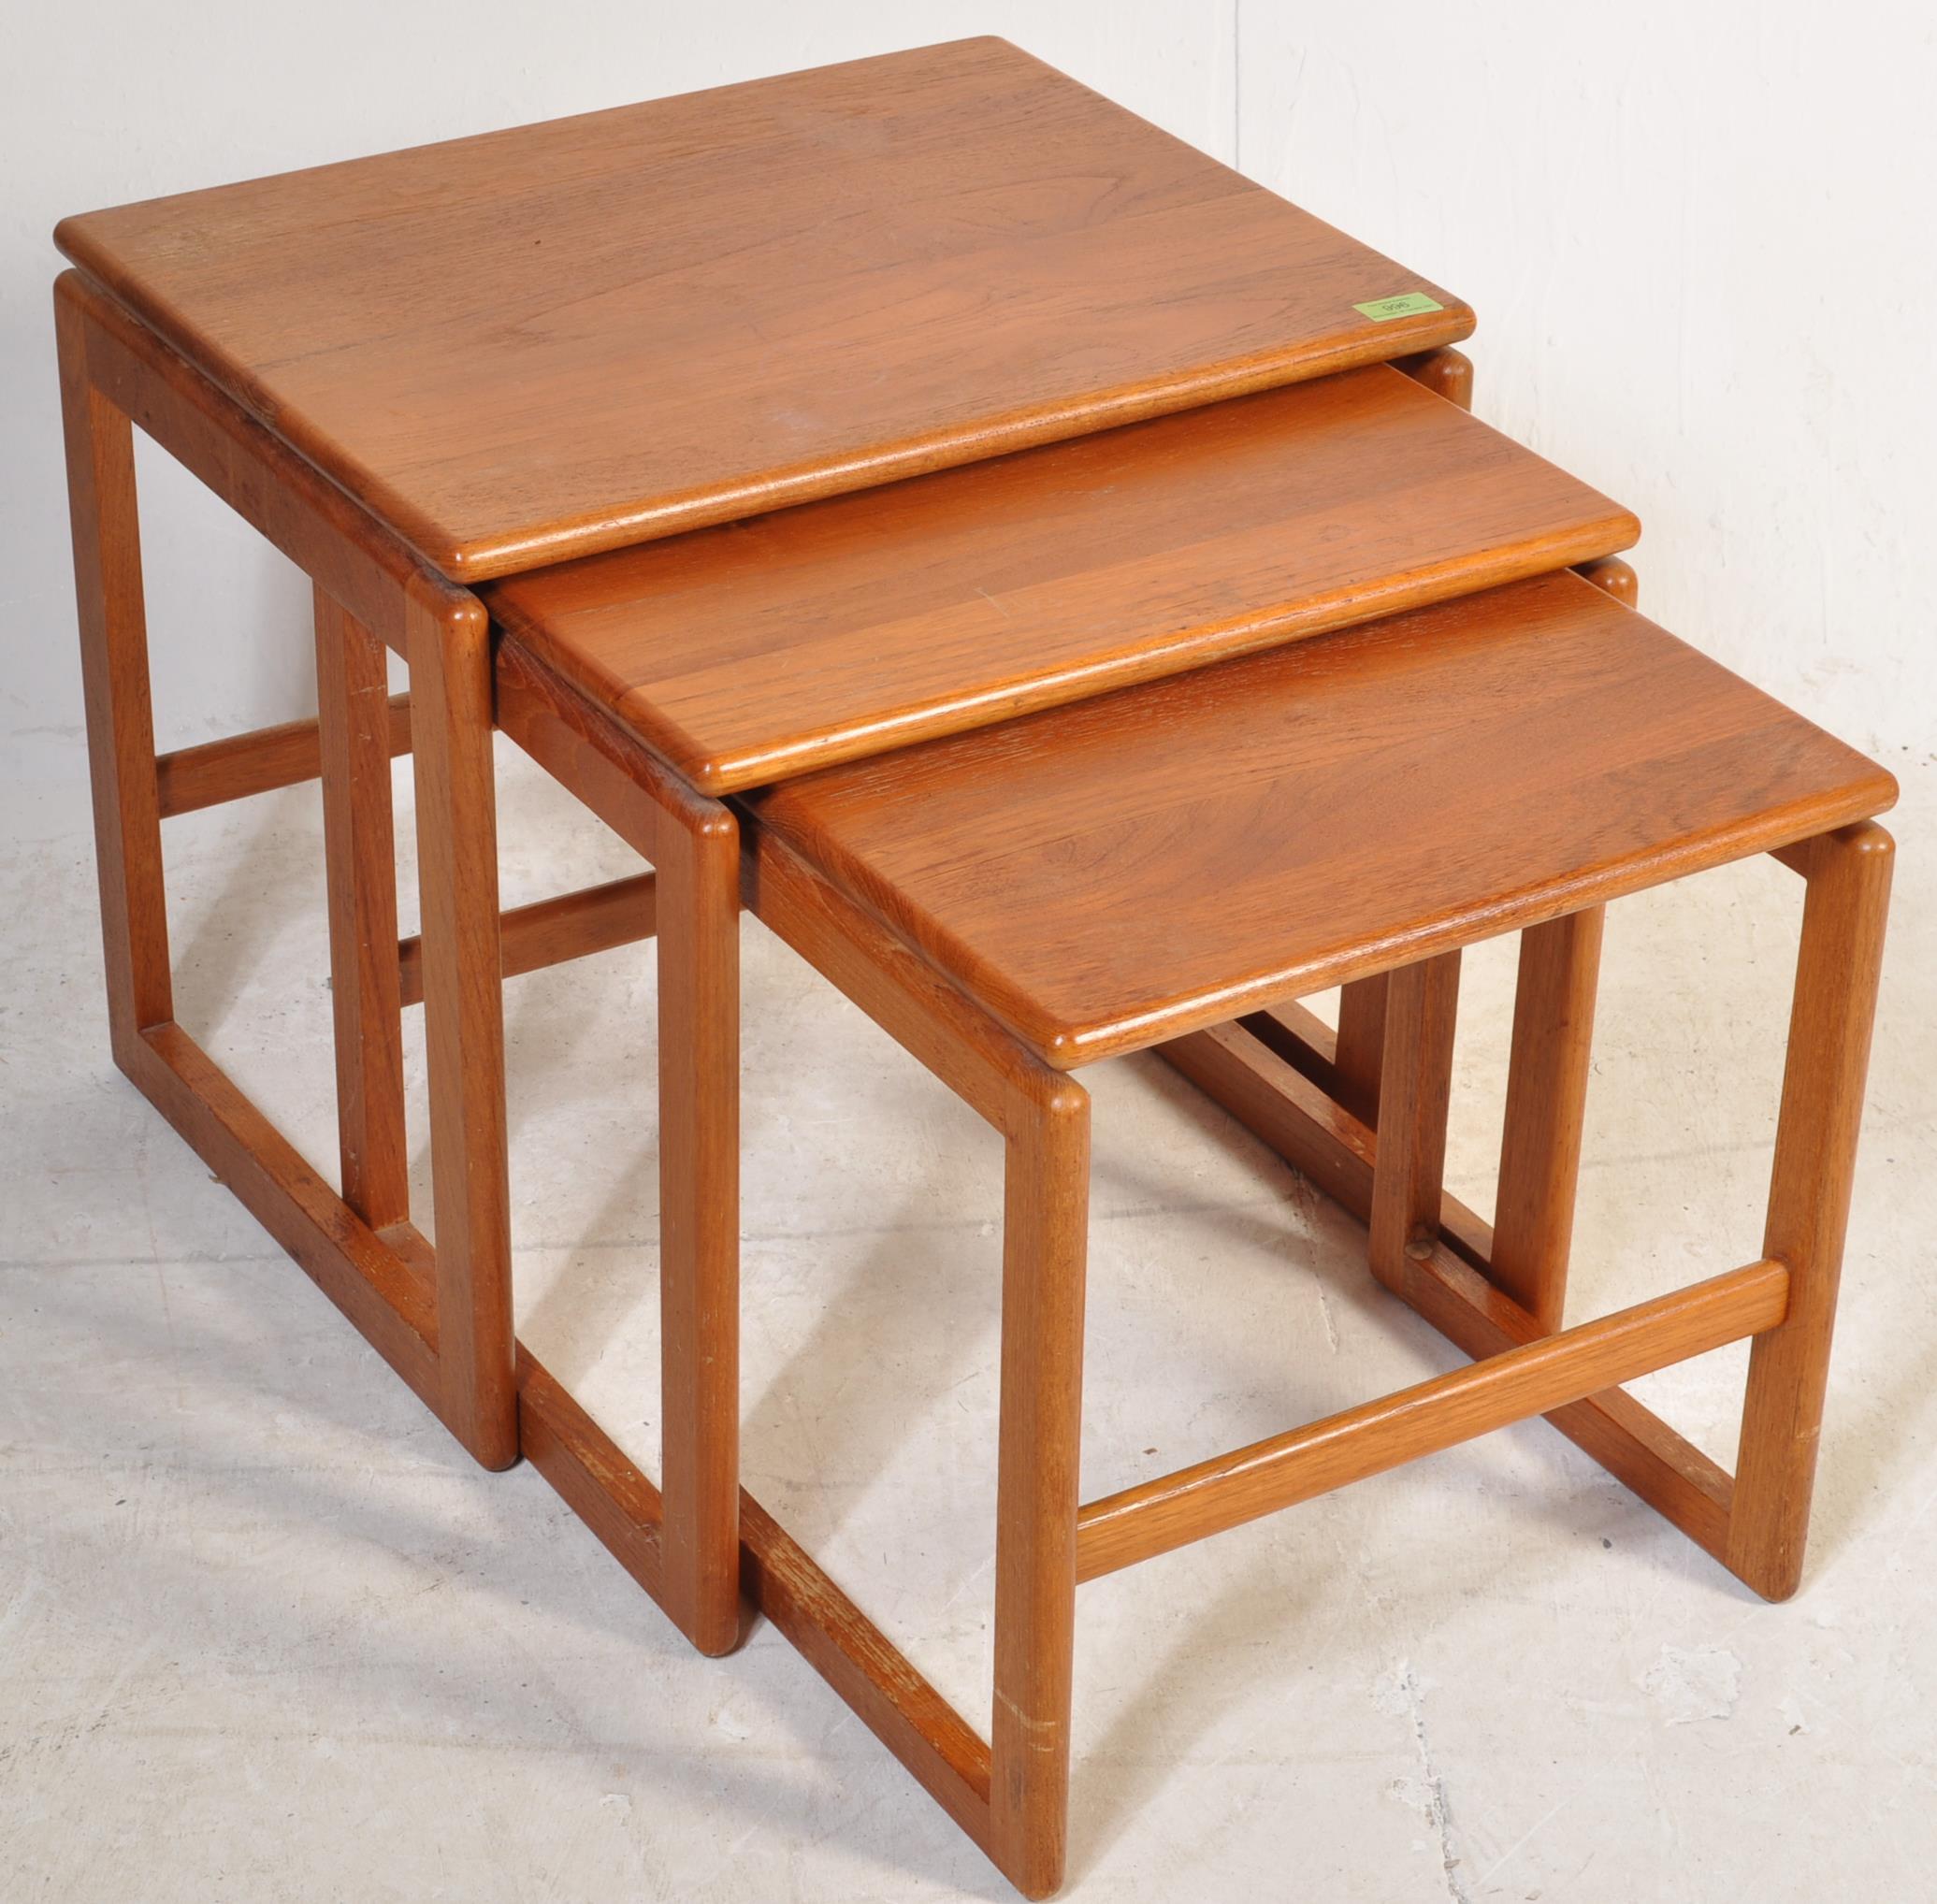 20TH CENTURY TEAK WOOD NEST OF TABLES BY MCINTOSH - Image 2 of 4